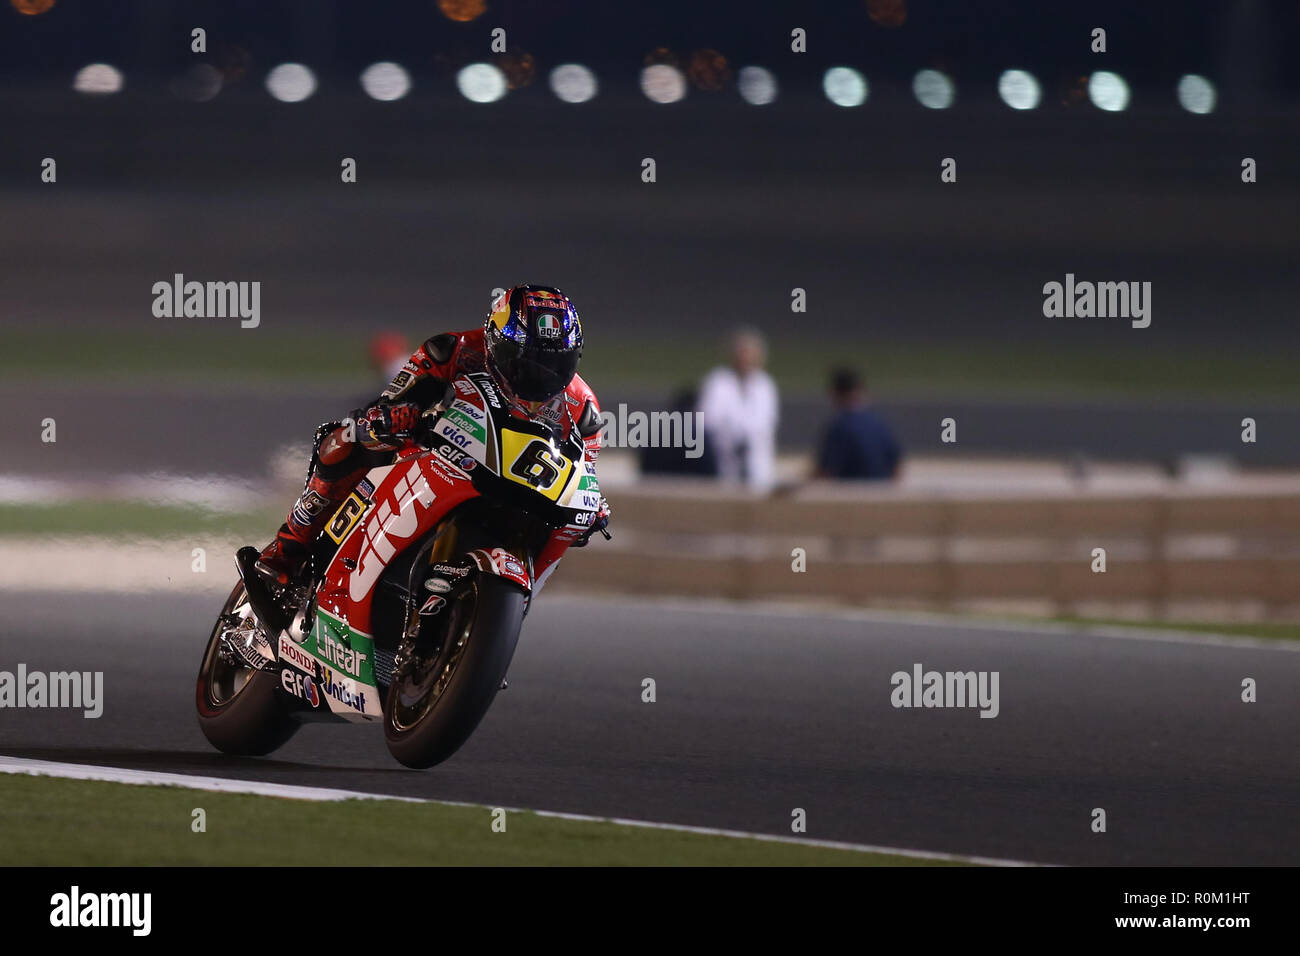 Stefan Bradl of Germany and LCR Honda MotoGP team steers his bike during a final session of the Moto GP World Championship at the Losail International Circuit. Stock Photo